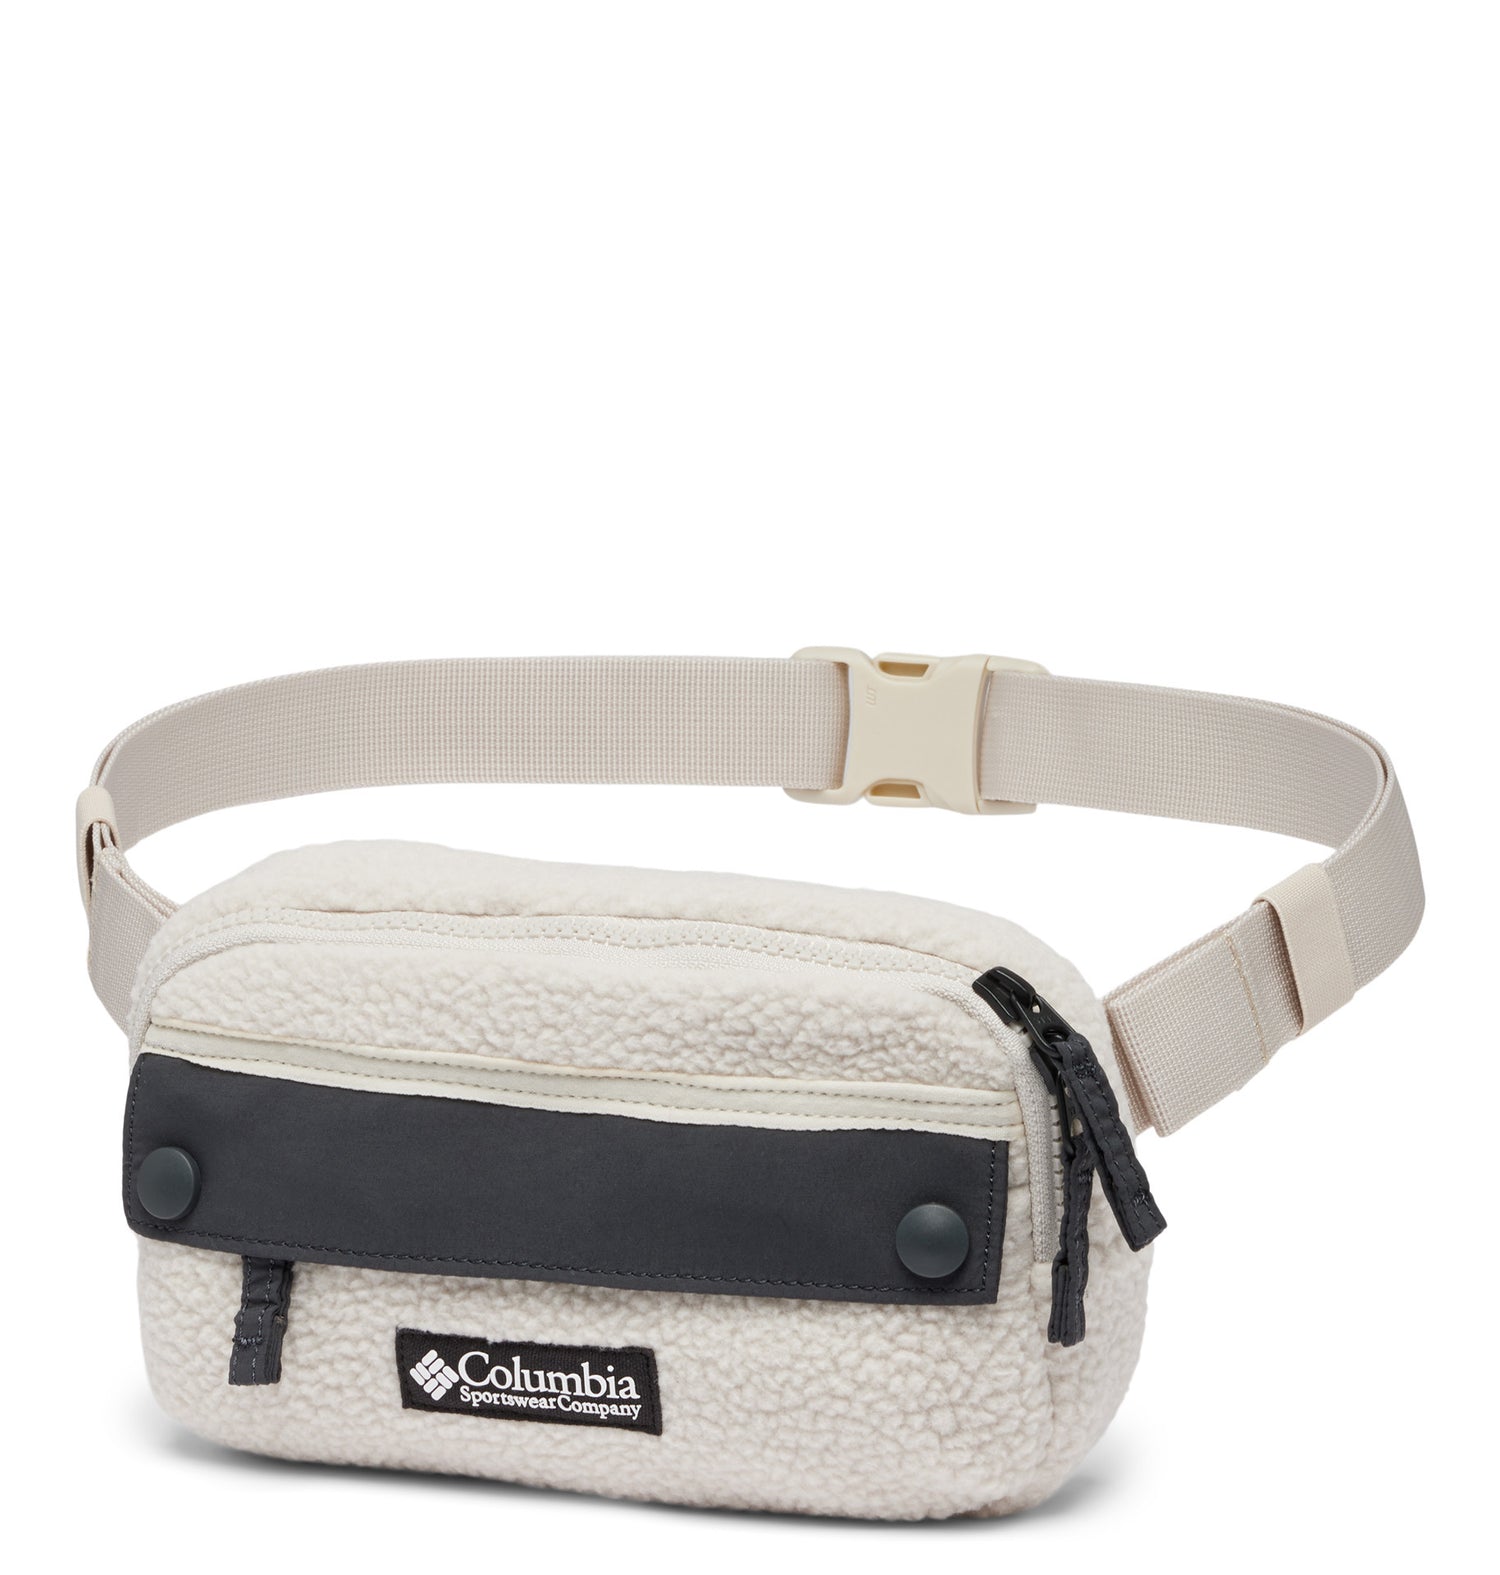 Front side view of a white fanny pack called Helvetia designed by Columbia showing its belt strap, pull tabs, snap-button closure, and colmbia logo on the front.